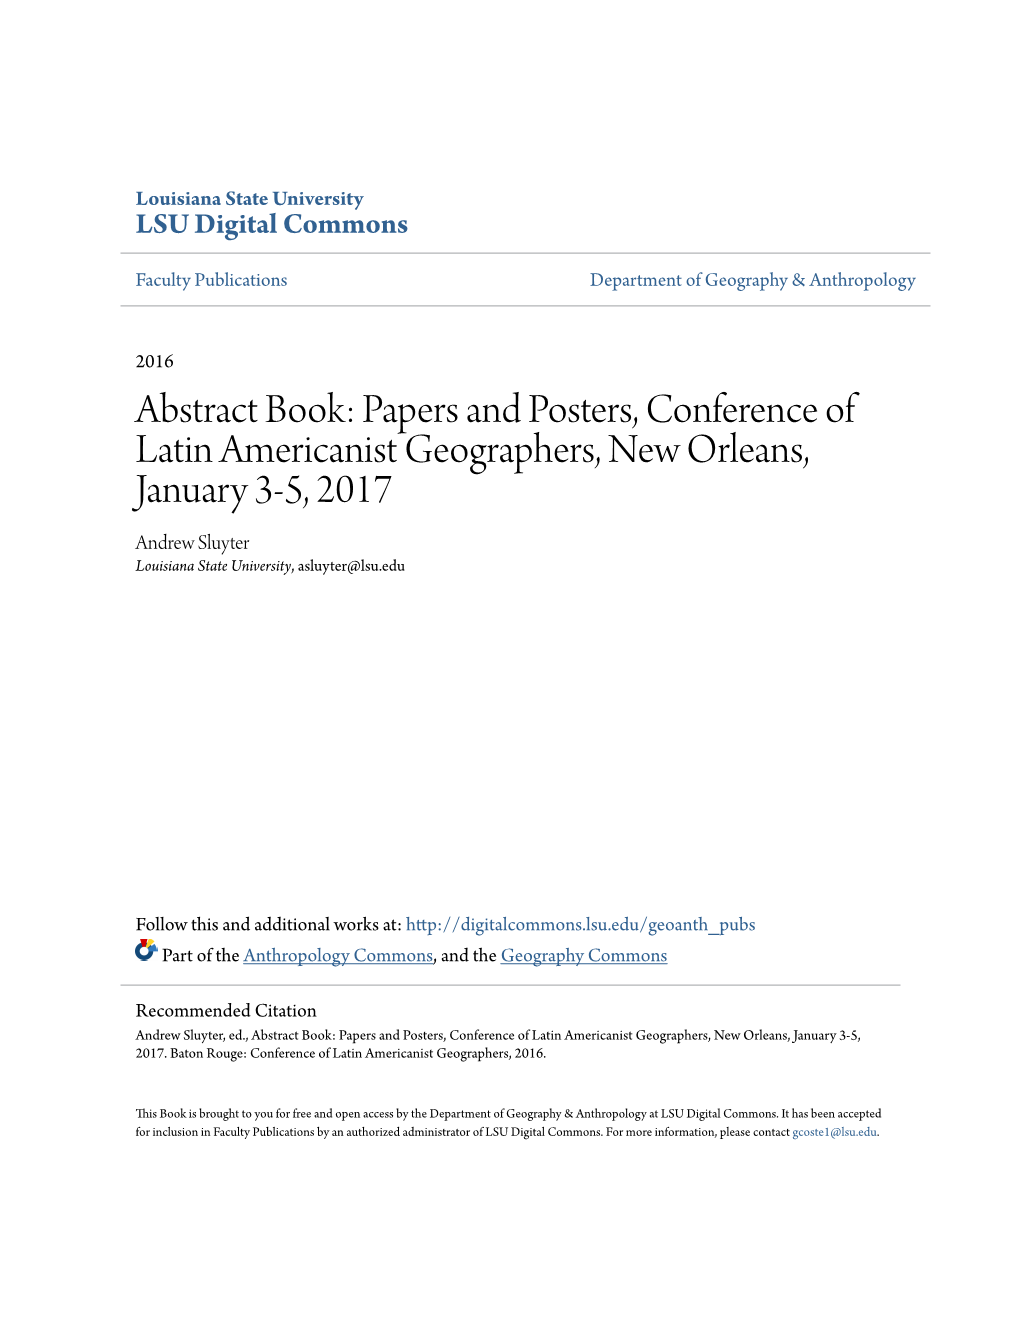 Papers and Posters, Conference of Latin Americanist Geographers, New Orleans, January 3-5, 2017 Andrew Sluyter Louisiana State University, Asluyter@Lsu.Edu